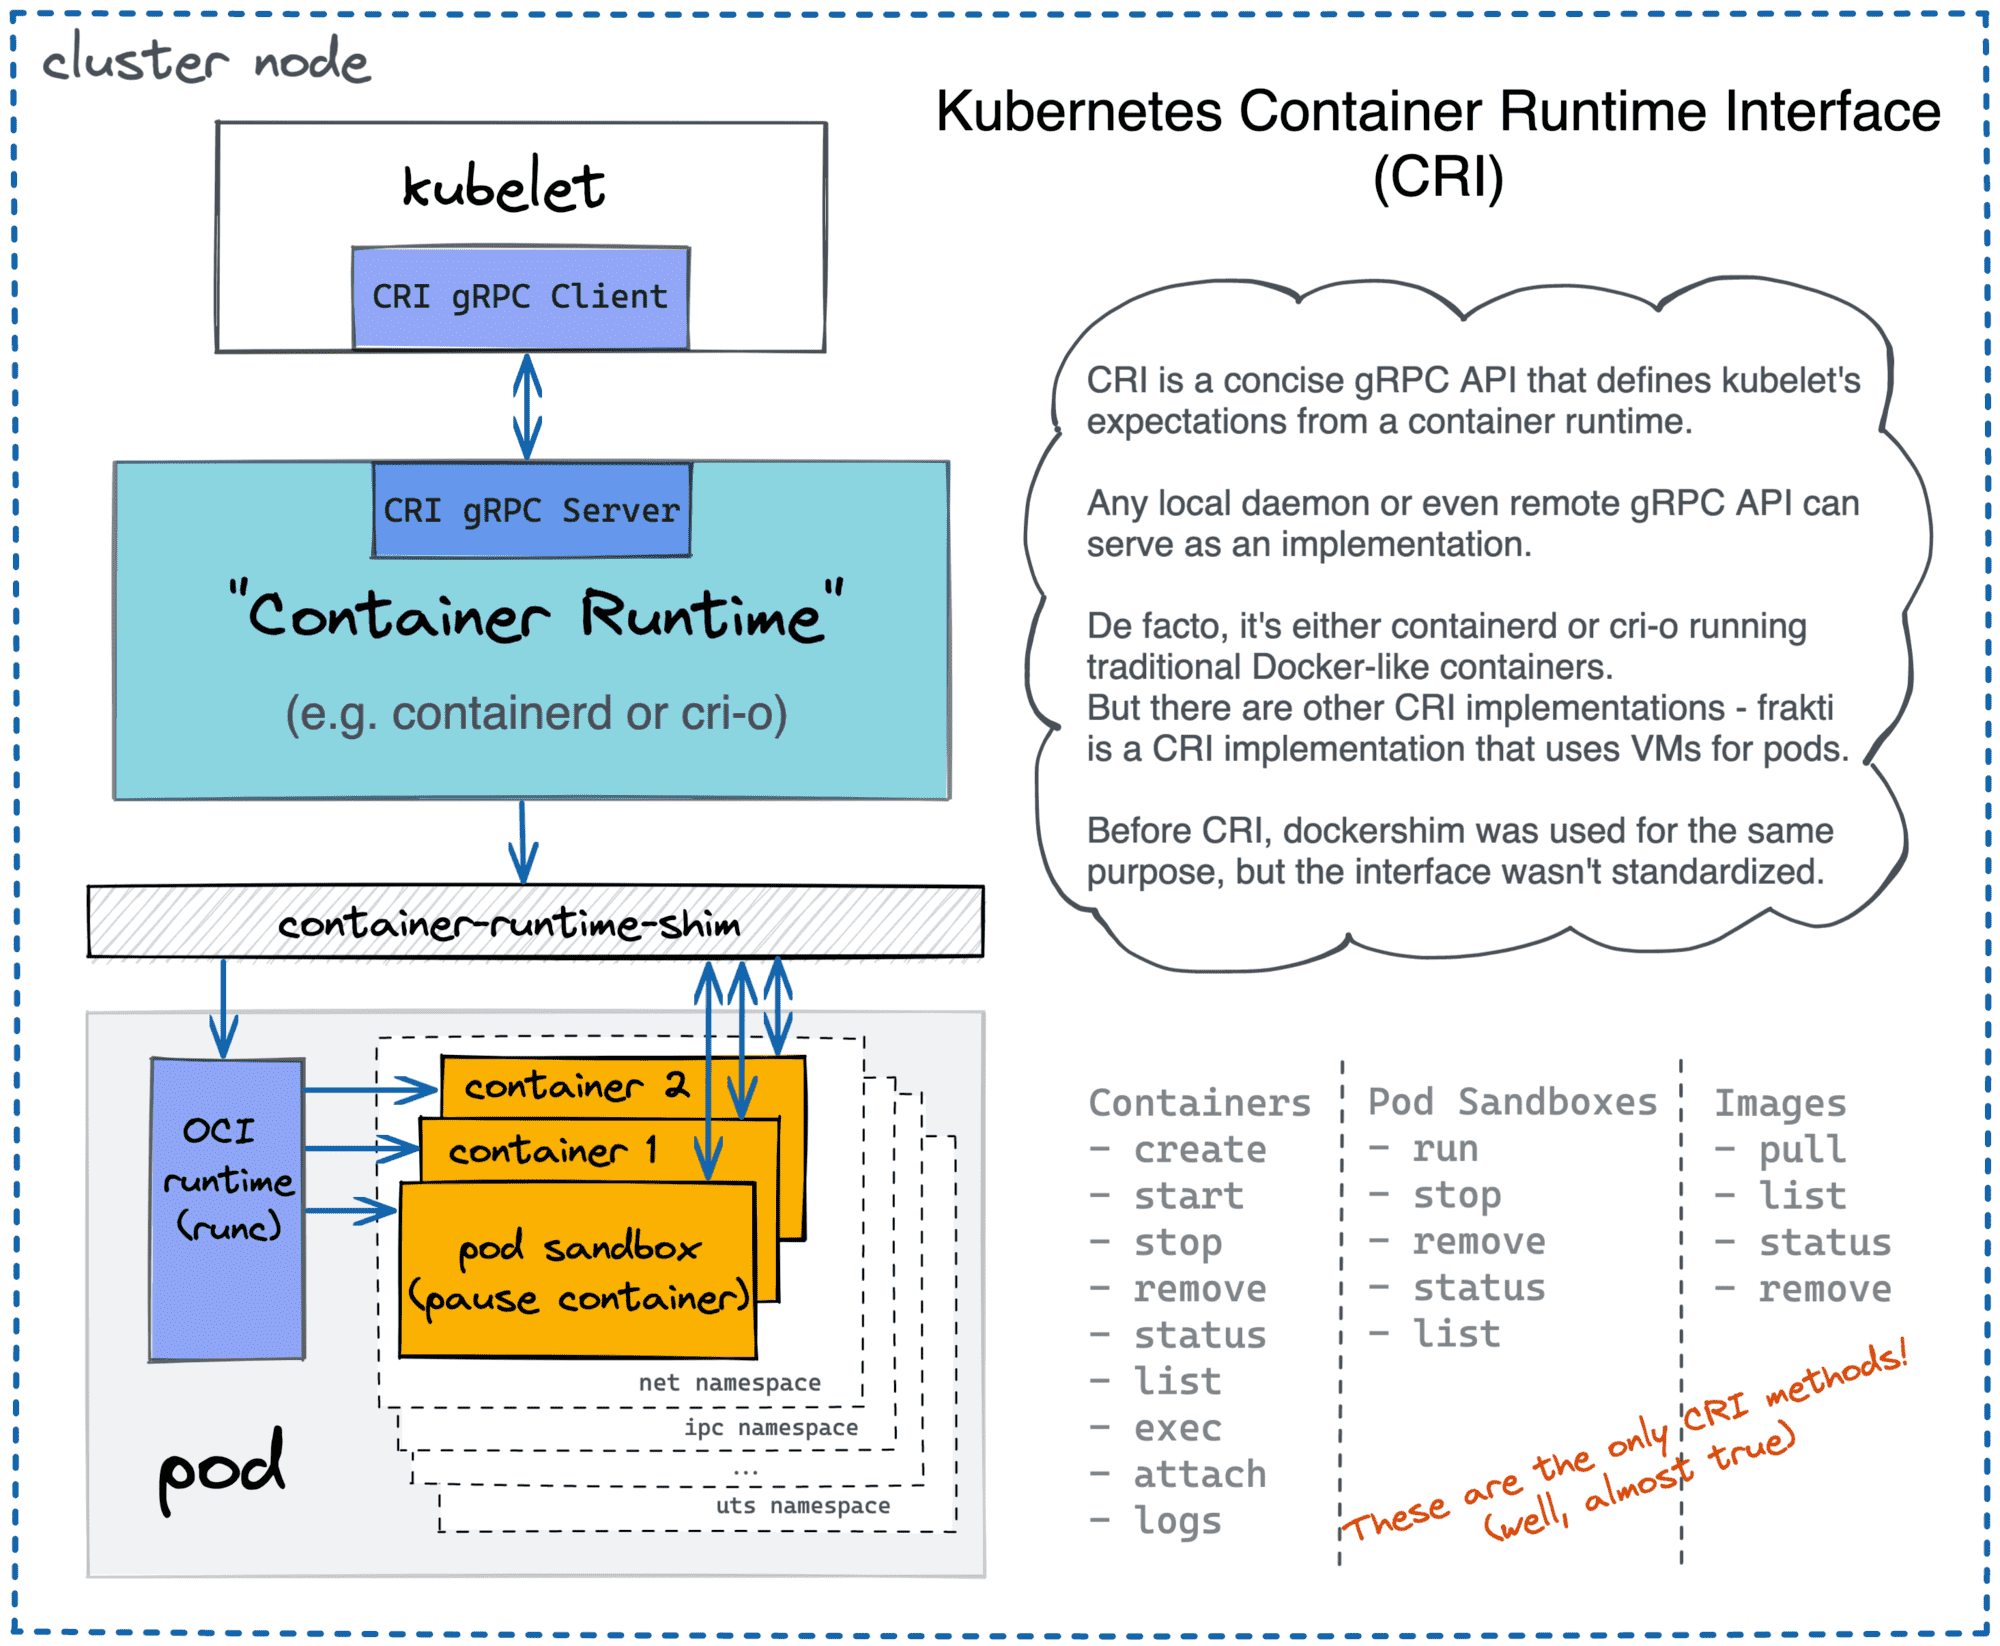 Kubernetes uses different container runtimes via CRI API